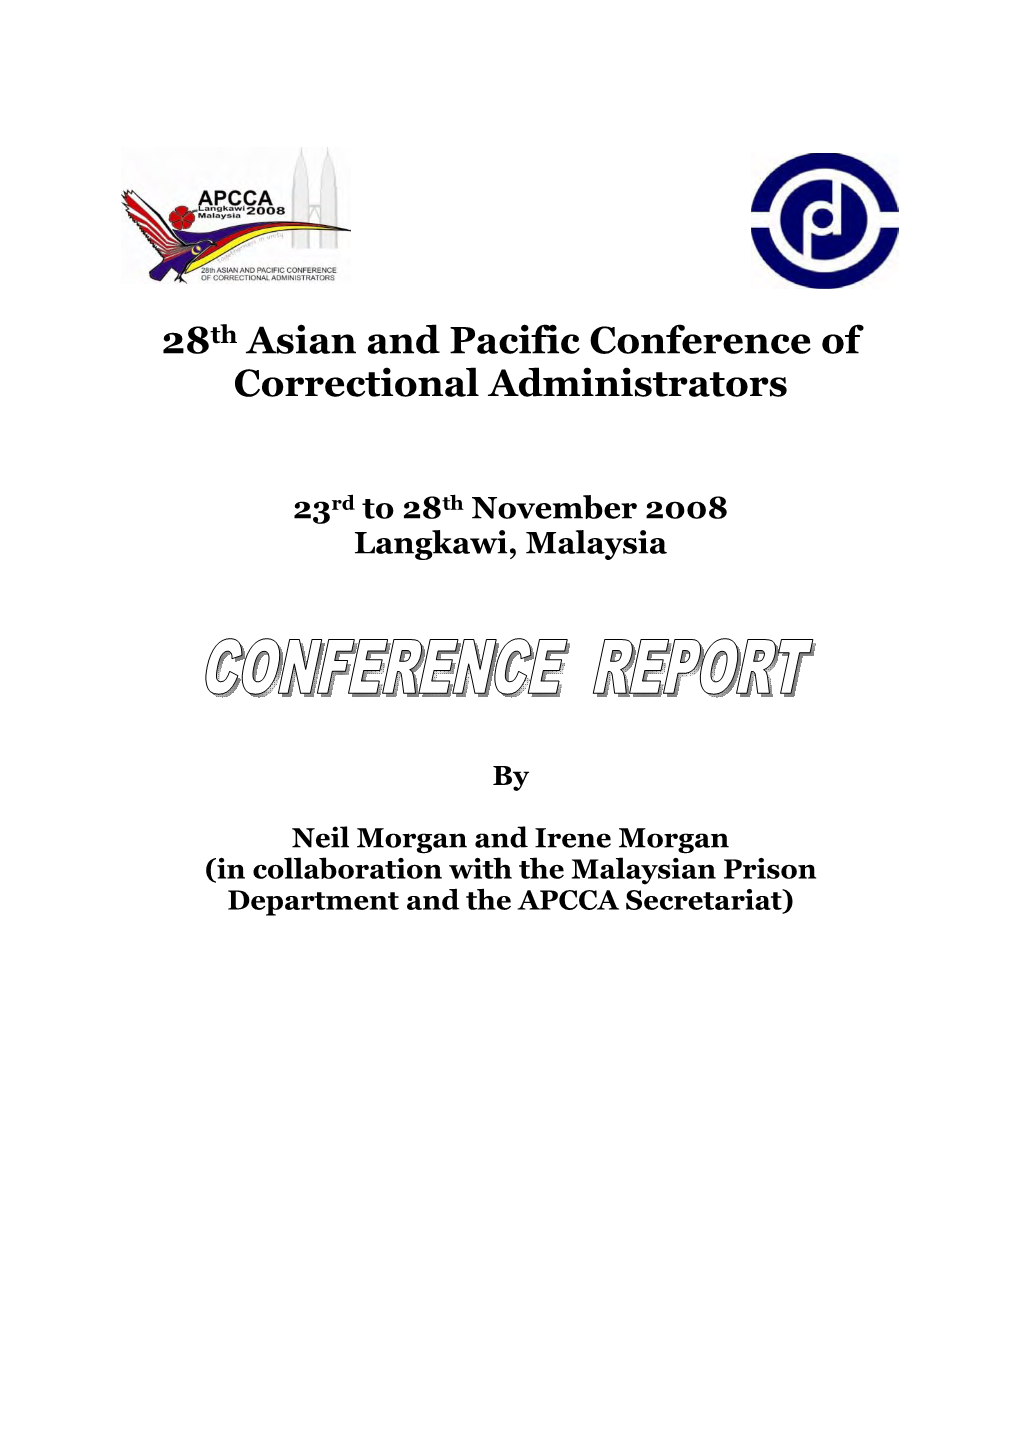 28Th APCCA Conference Report 2008 (Langkawi, Malaysia)